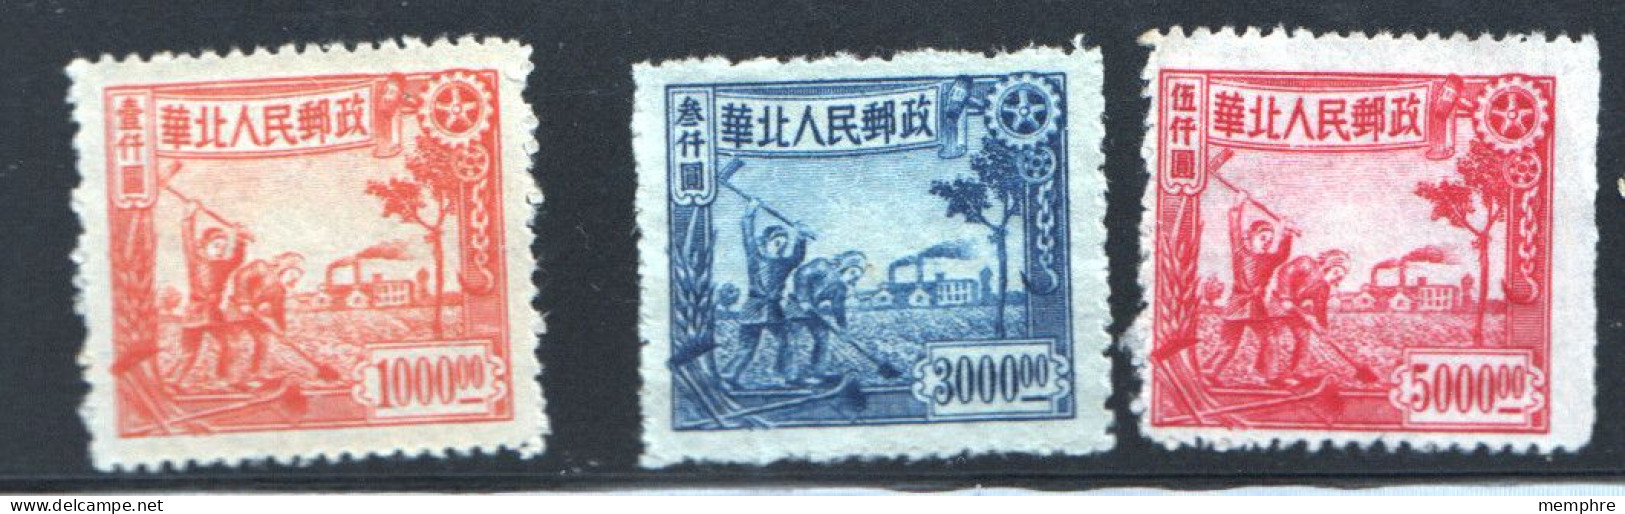 1949 North China Peasants And Actory Complete Set Of 3 Sc 3L96-8 No Gum, As Issued - Noord-China 1949-50